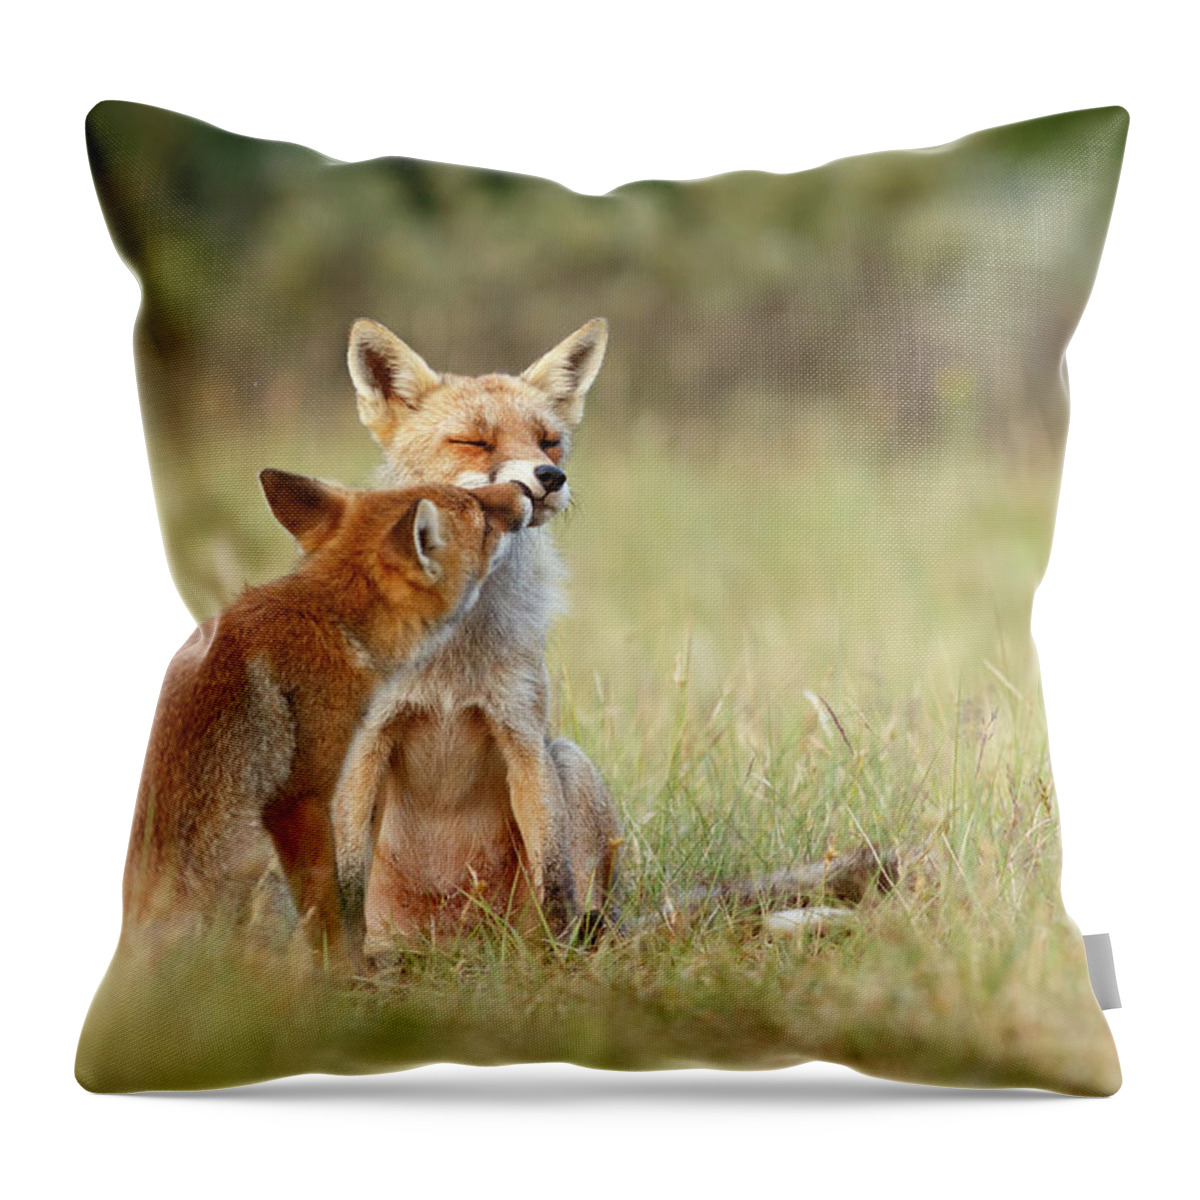 Red Fox Throw Pillow featuring the photograph Fox Love Series - Kiss by Roeselien Raimond